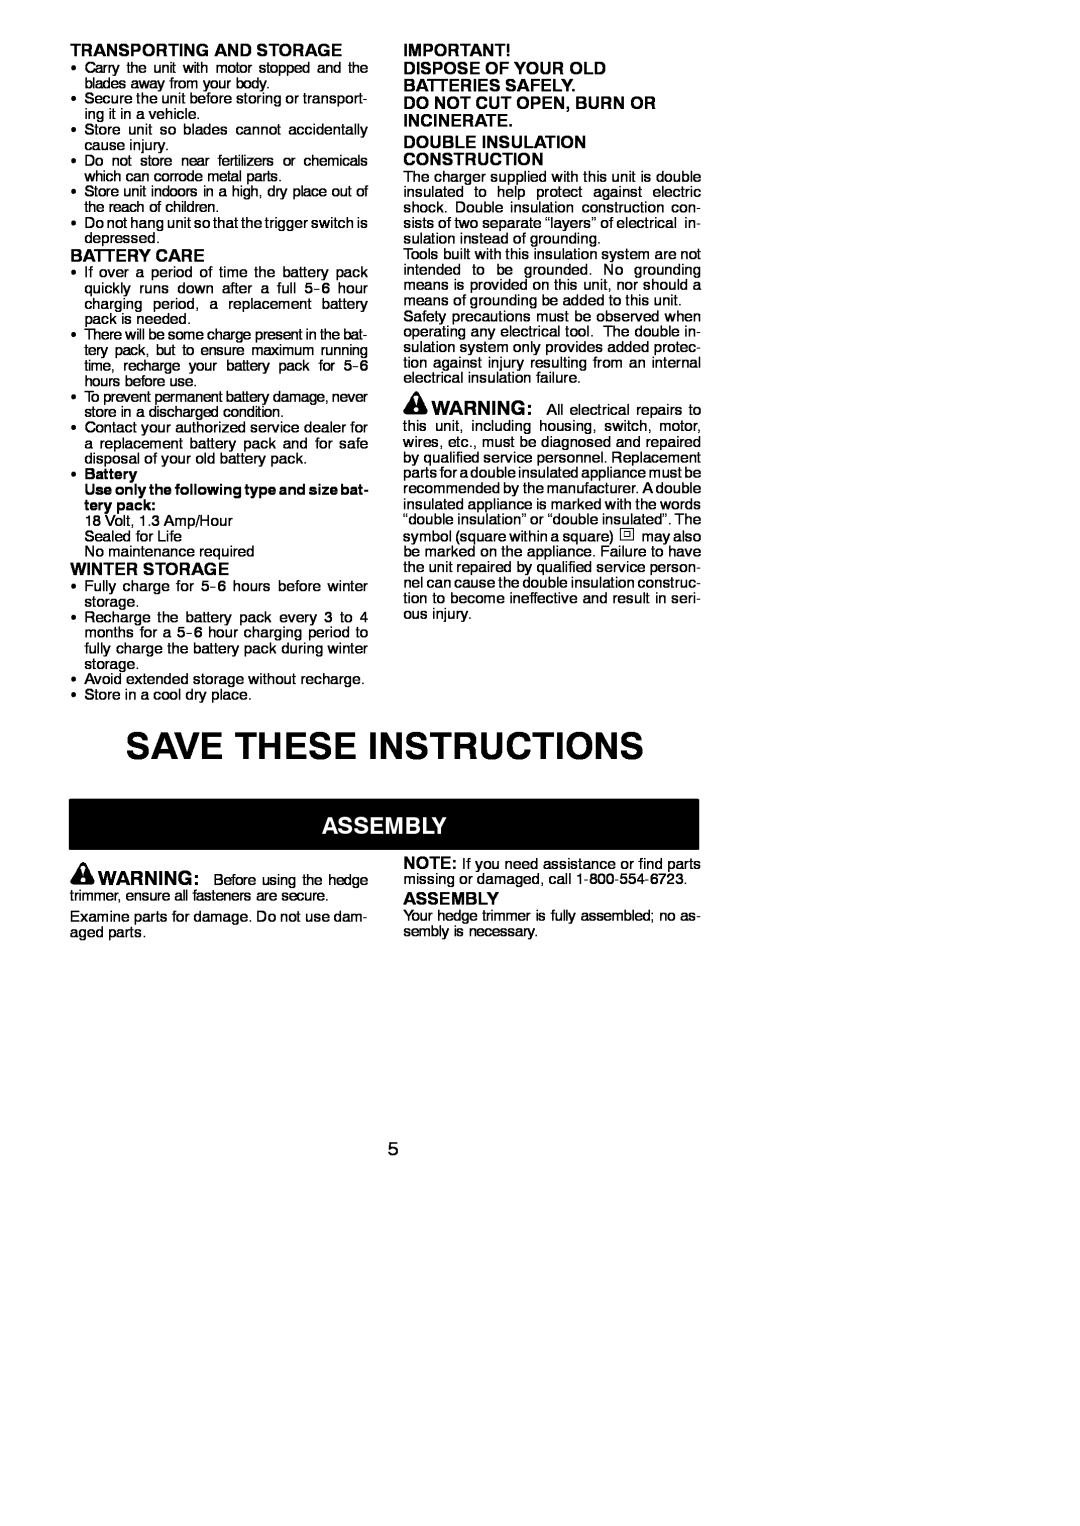 Weed Eater 952711899 Save These Instructions, Assembly, Transporting And Storage, Battery Care, Winter Storage, SBattery 